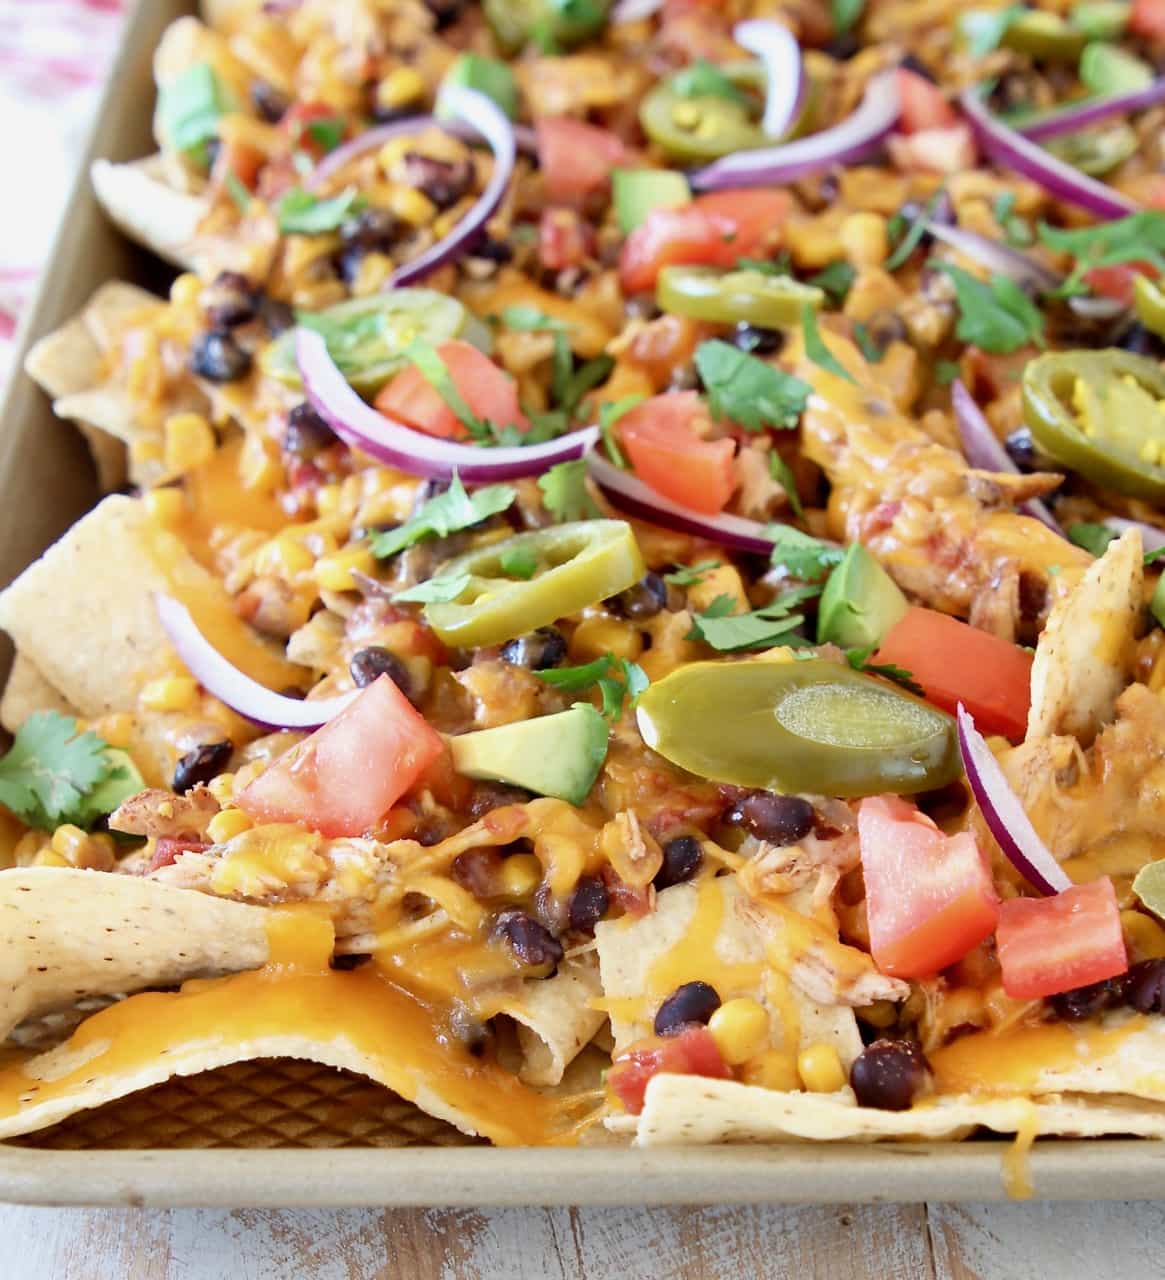 Sheet pan of chicken nachos with black beans, cheese, tomatoes, sliced jalapenos, red onions and avocado